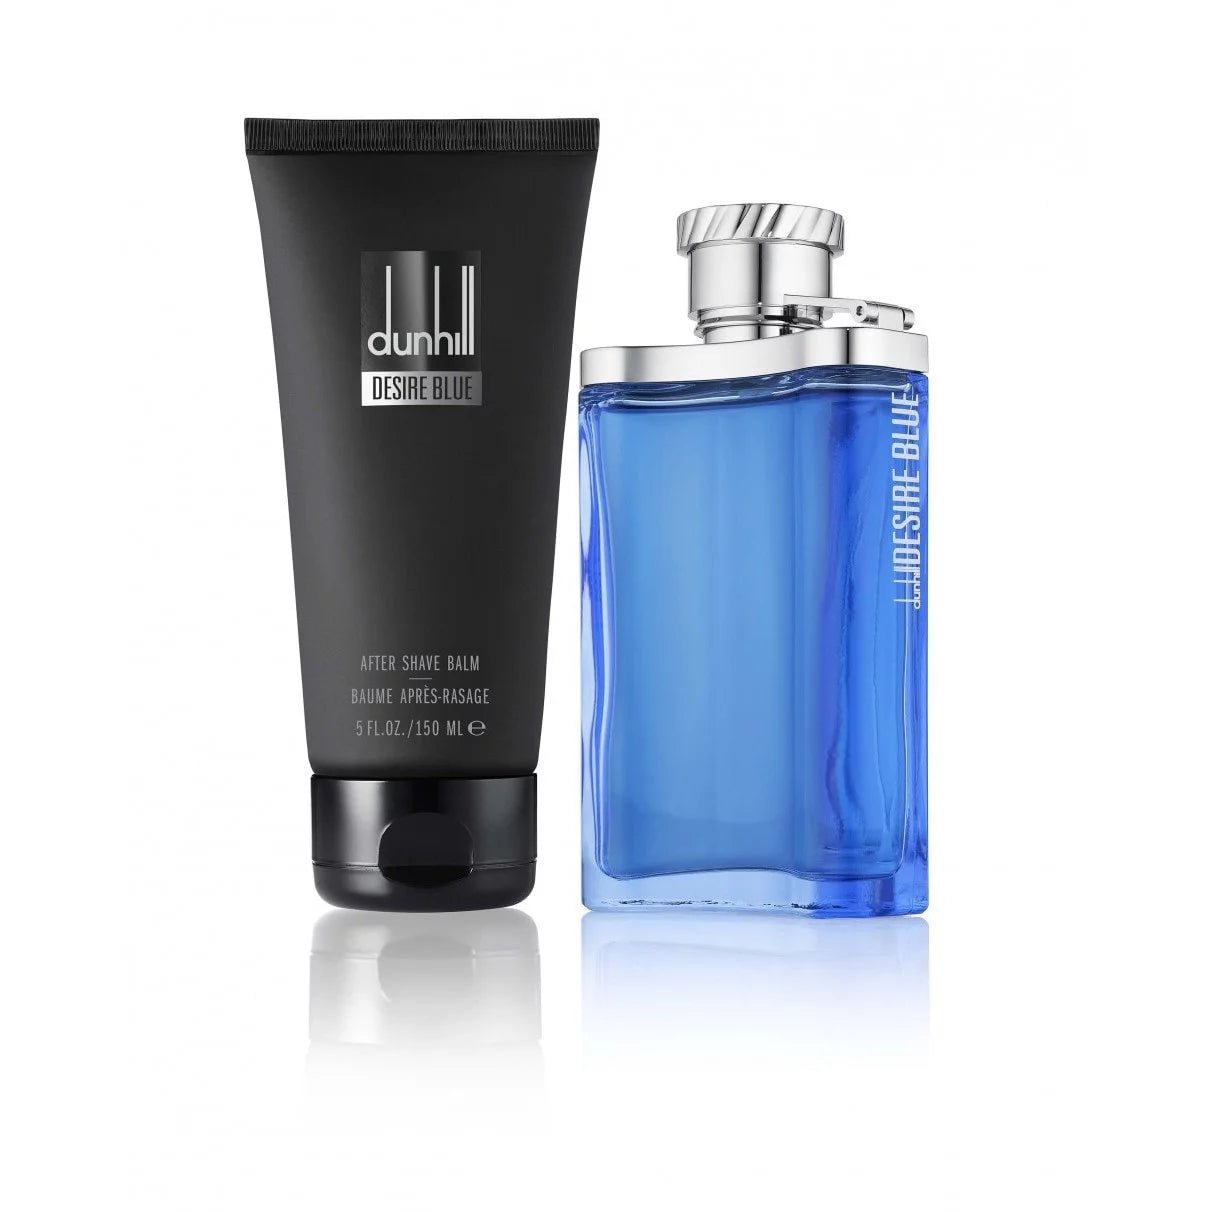 Dunhill Desire Blue After Shave Balm | My Perfume Shop Australia